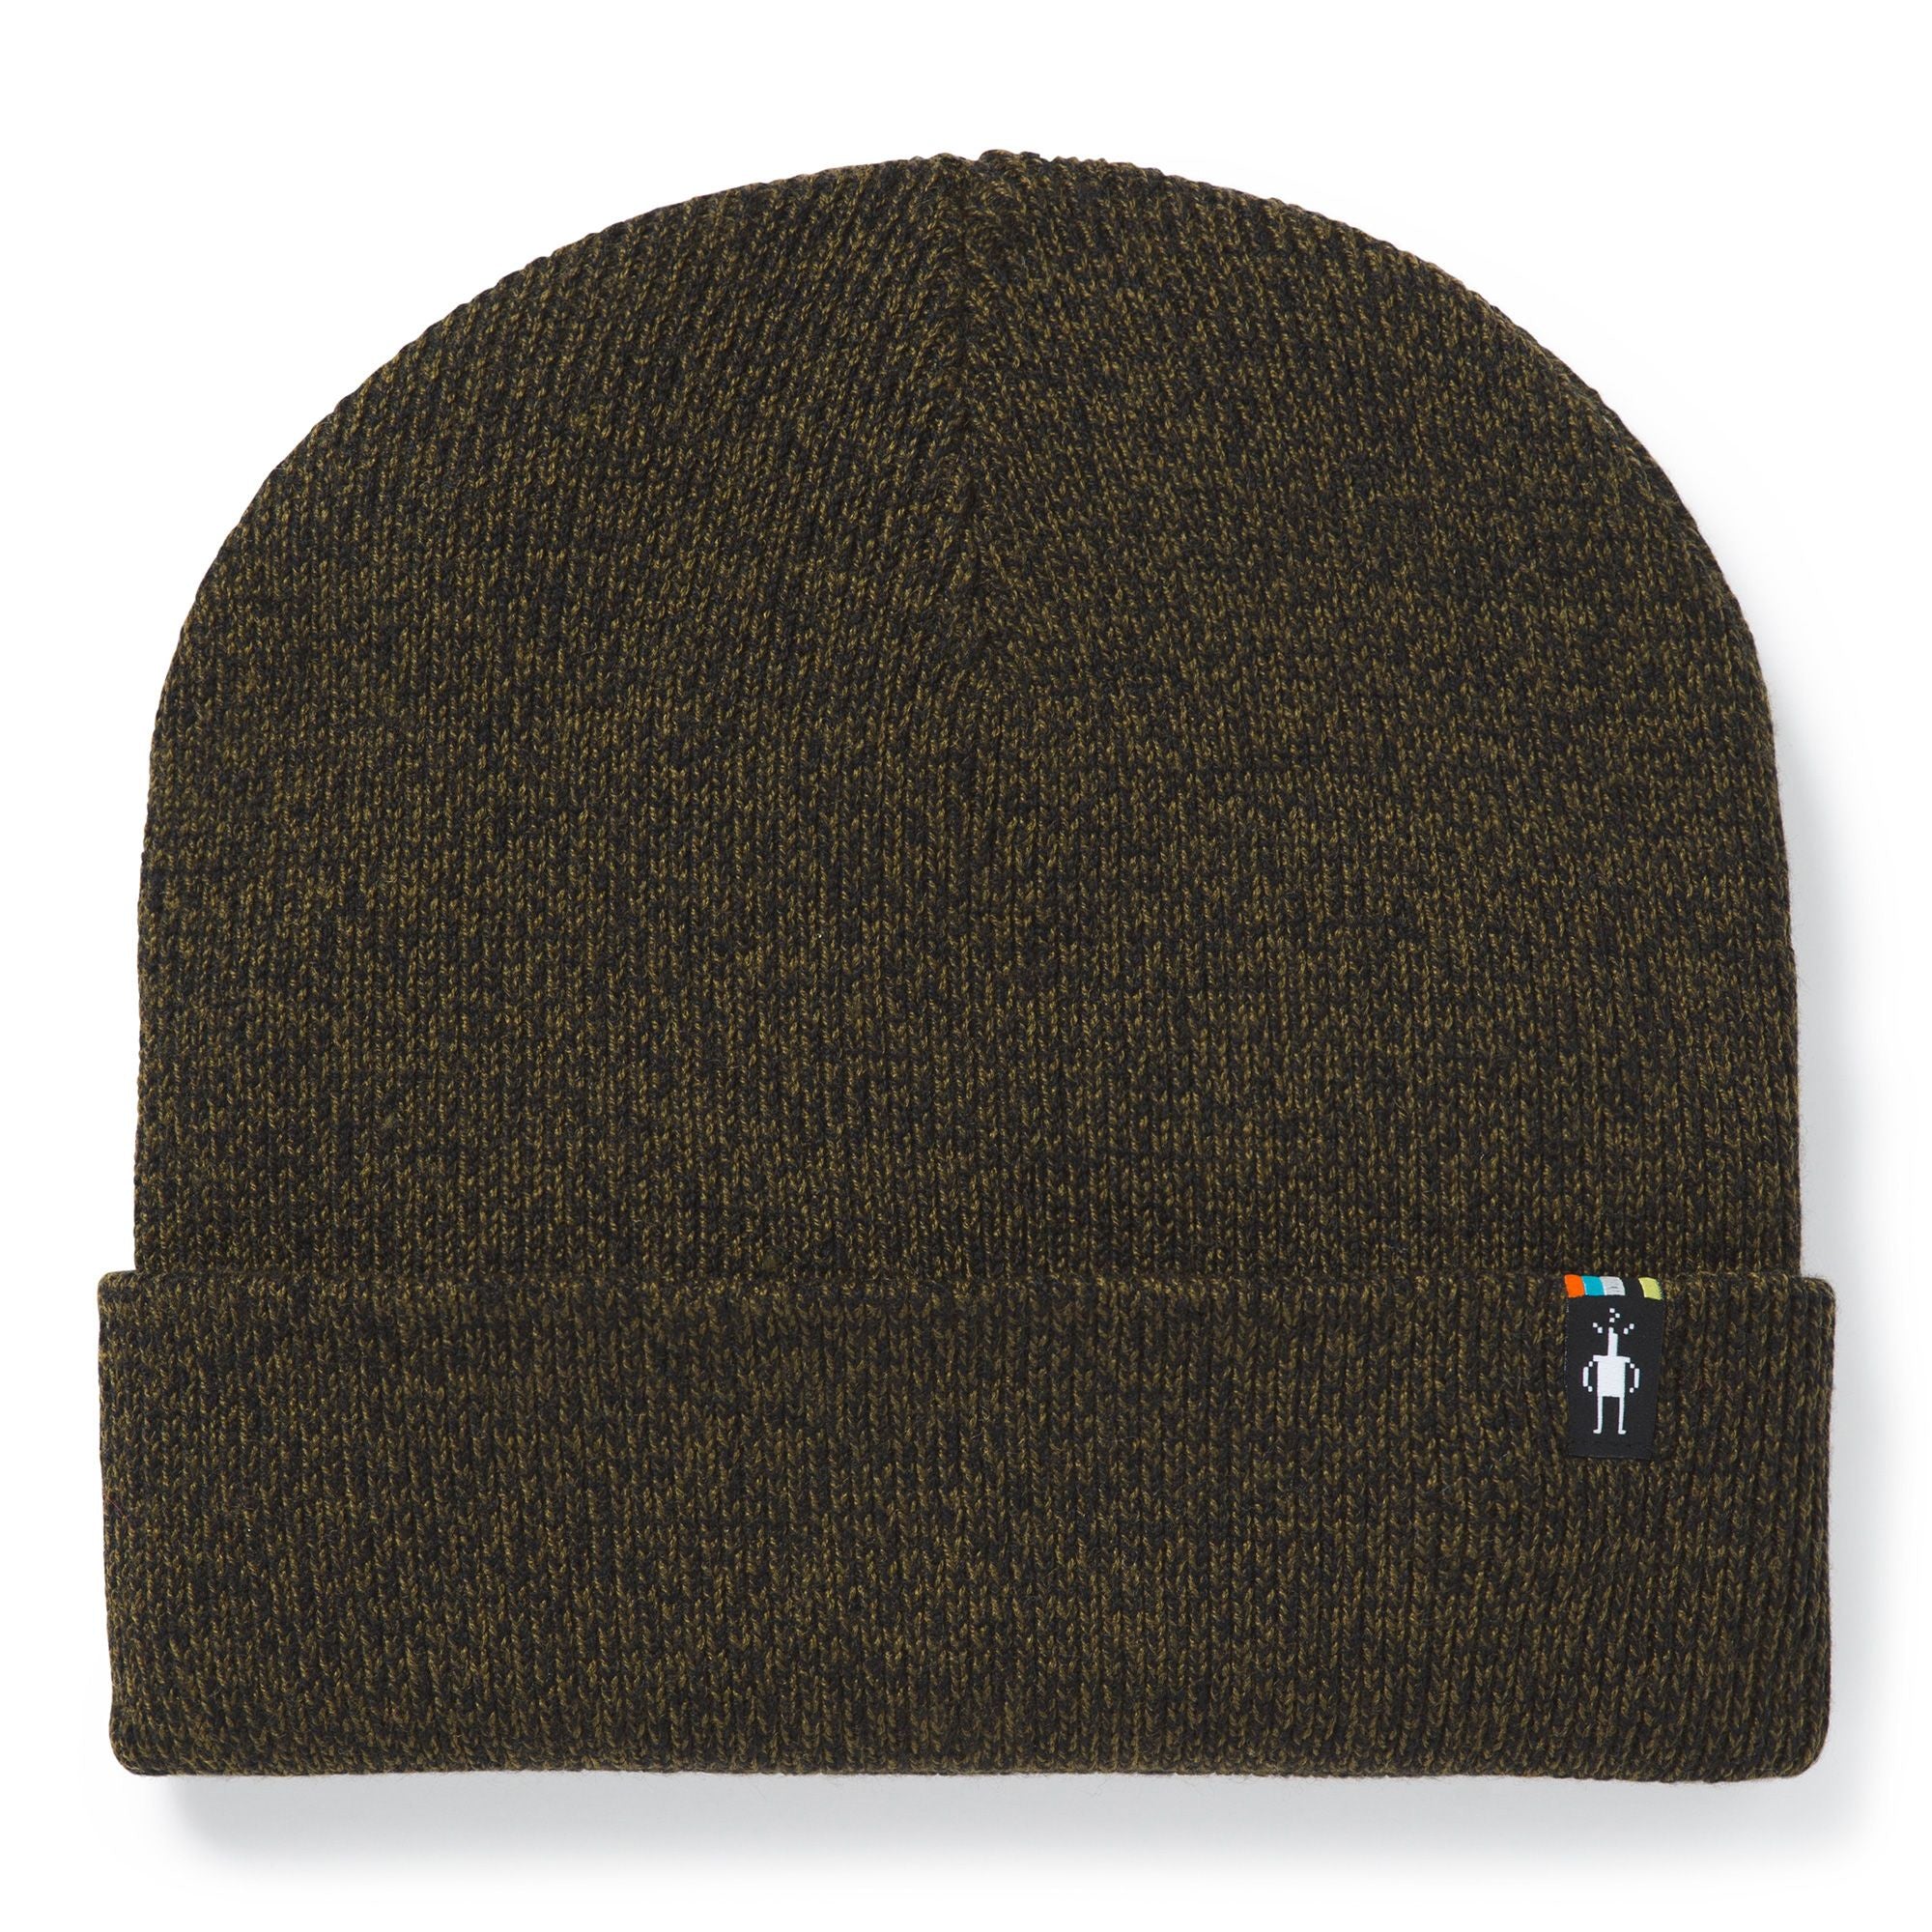 SMARTWOOL - COZY CABIN HAT IN MILITARY OLIVE